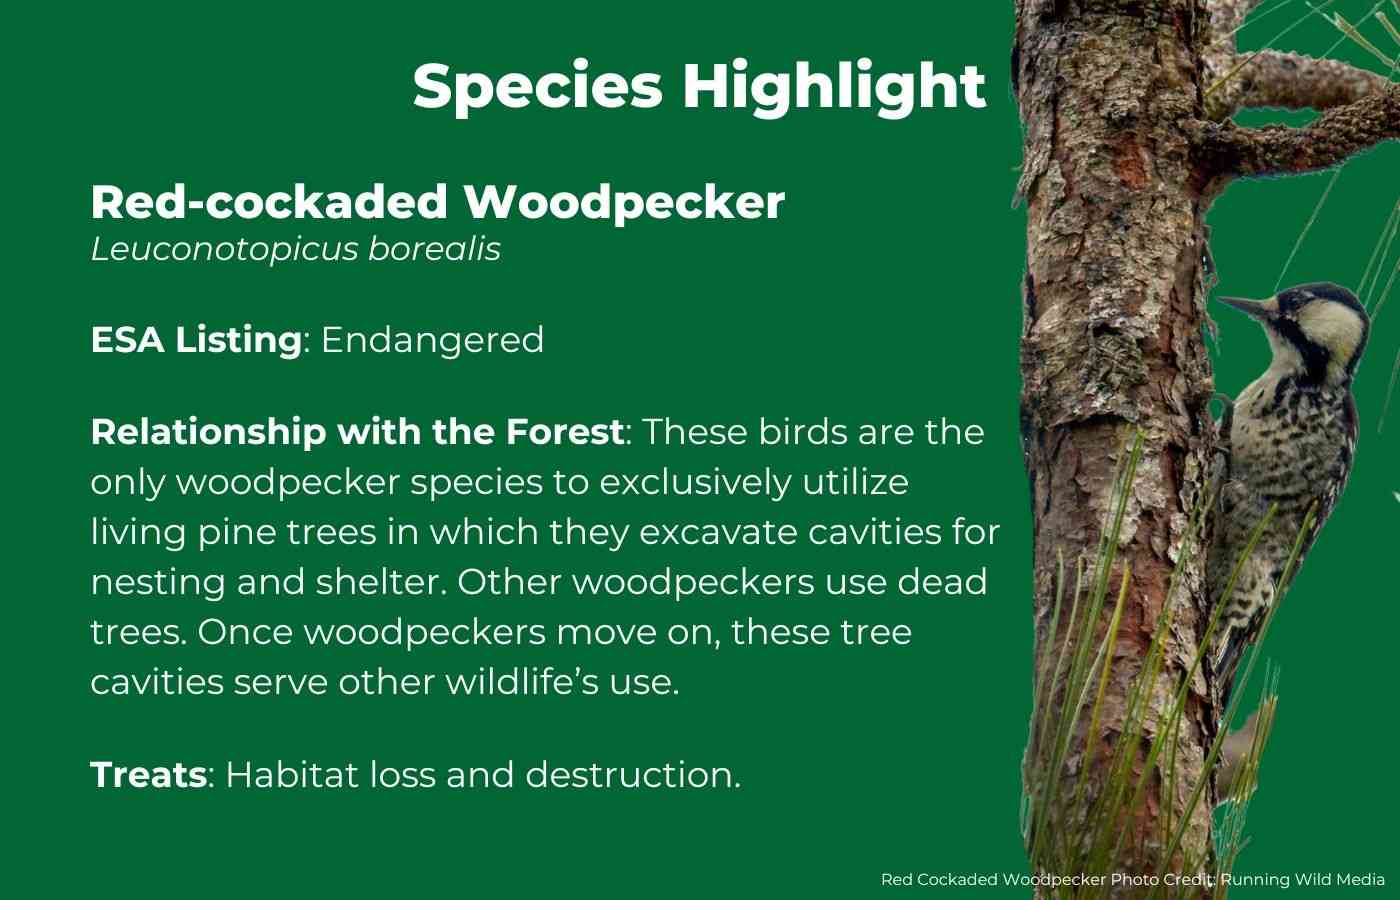 Red-cockaded Woodpecker Facts Graphic